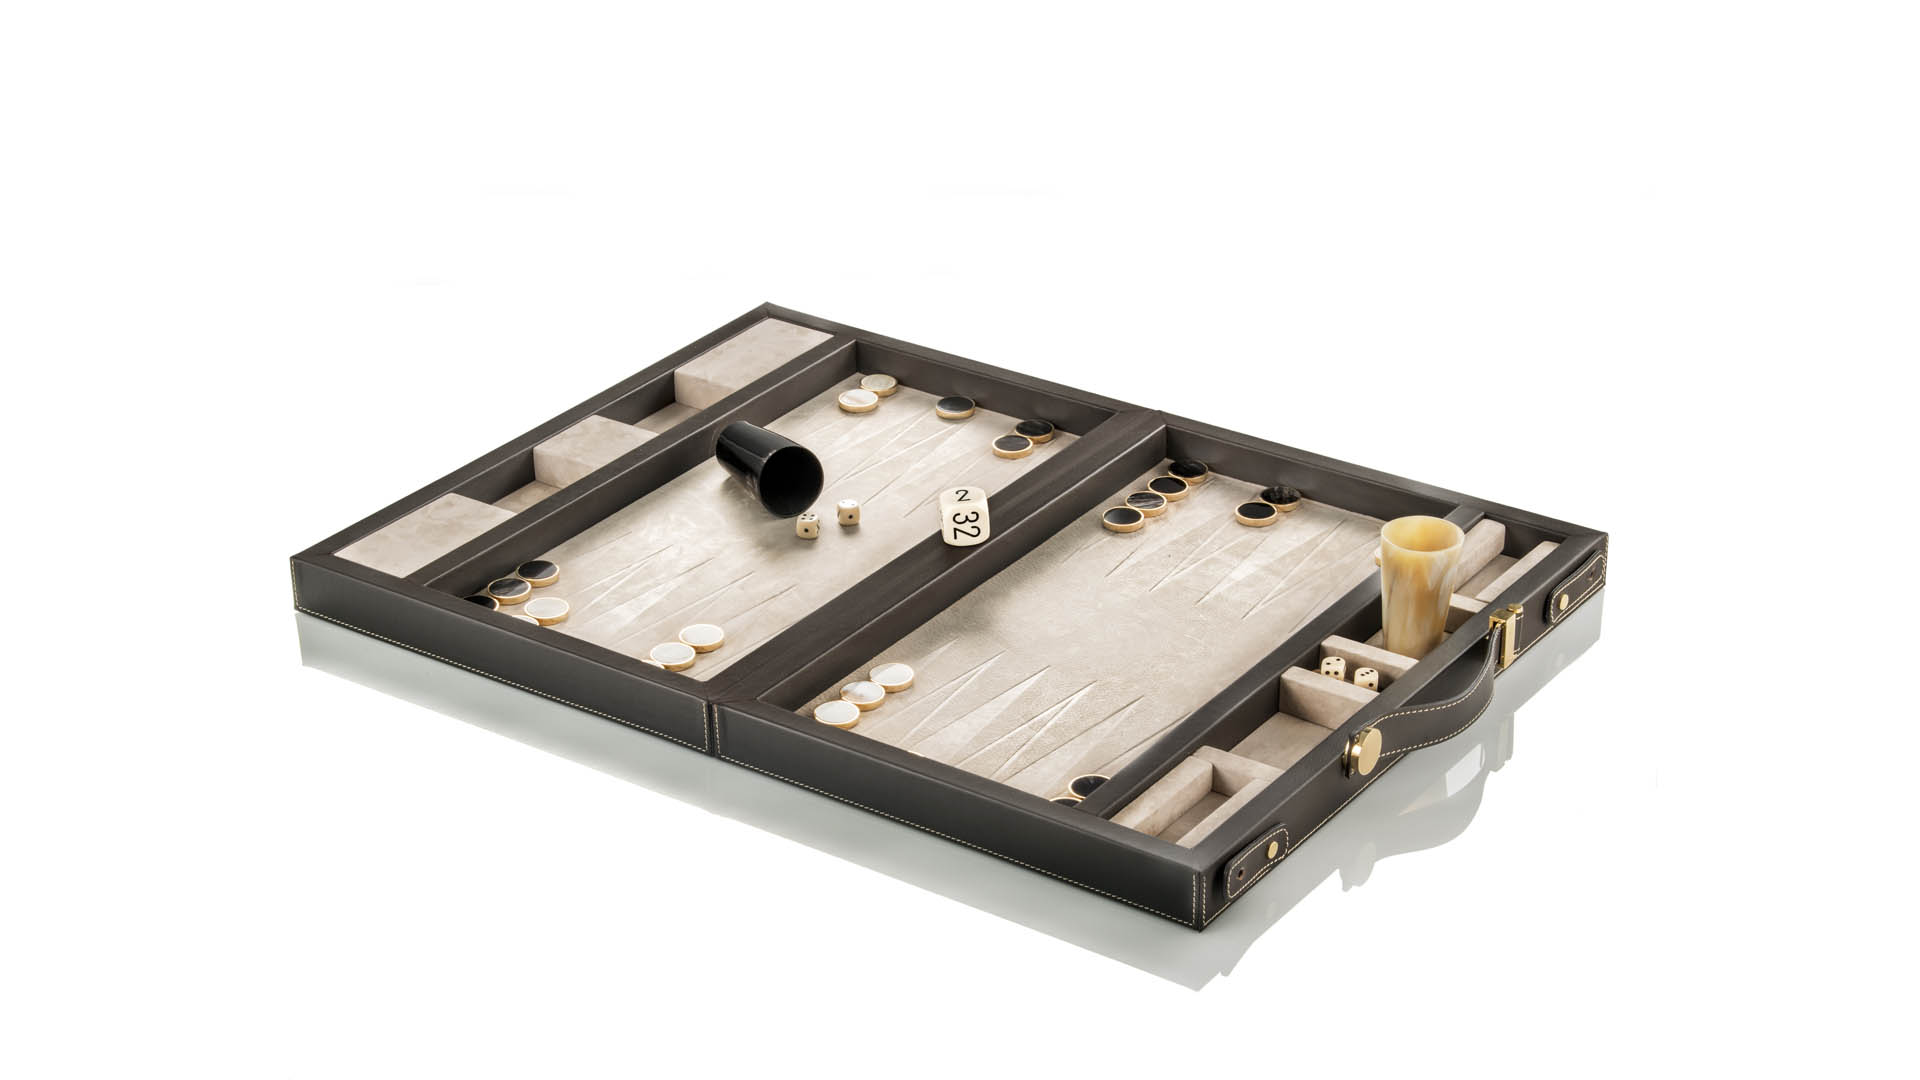 Gaming tables - Lepanto backgammon in leahter and horn - cover - Arcahorn